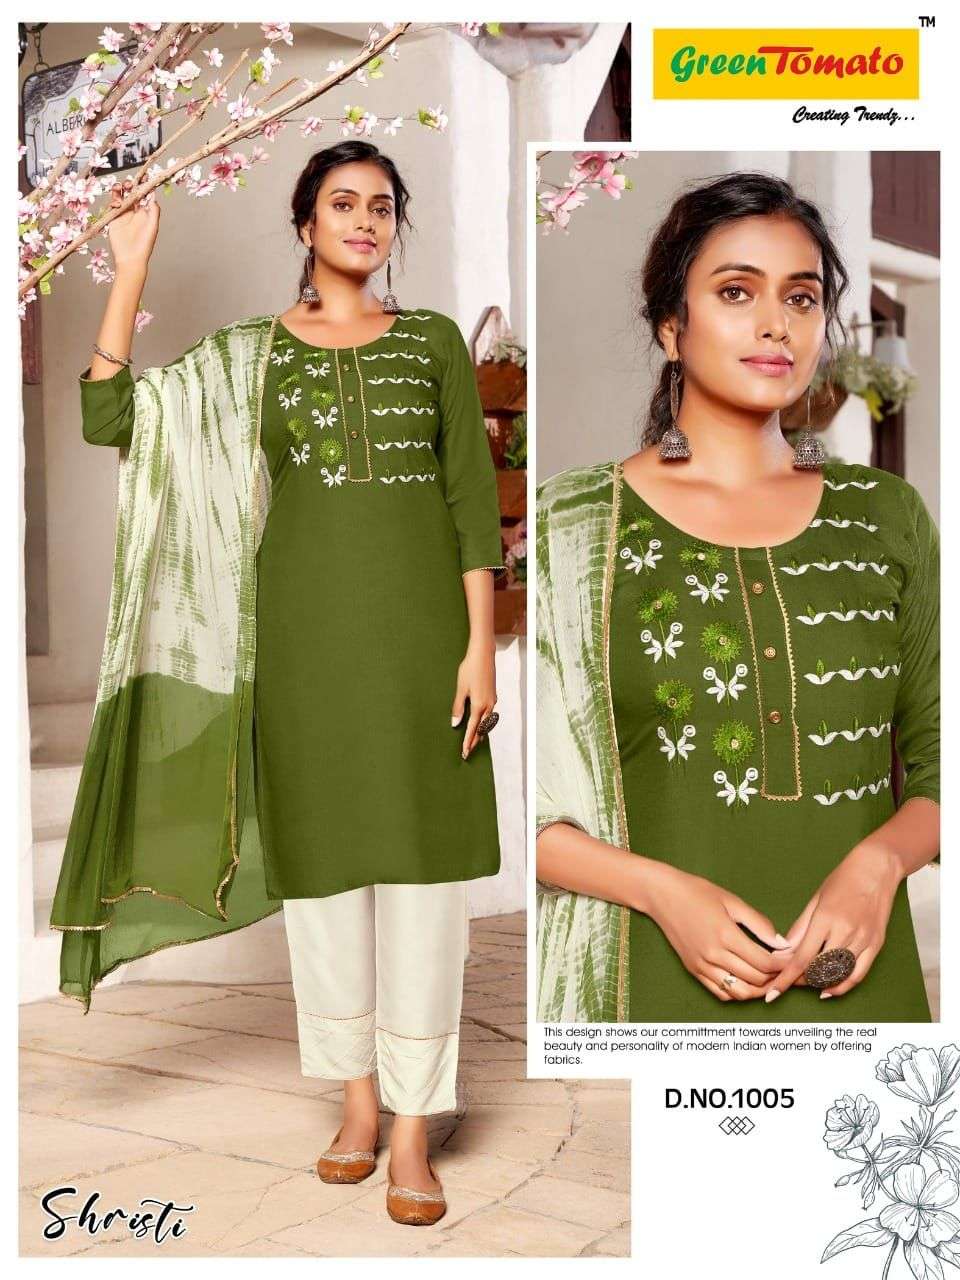 Shristi By Green Tomato 1001 To 1008 Series Beautiful Summer Collection Pakisatni Suits Stylish Fancy Colorful Casual Wear & Ethnic Wear Rayon Embroidery Dresses At Wholesale Price